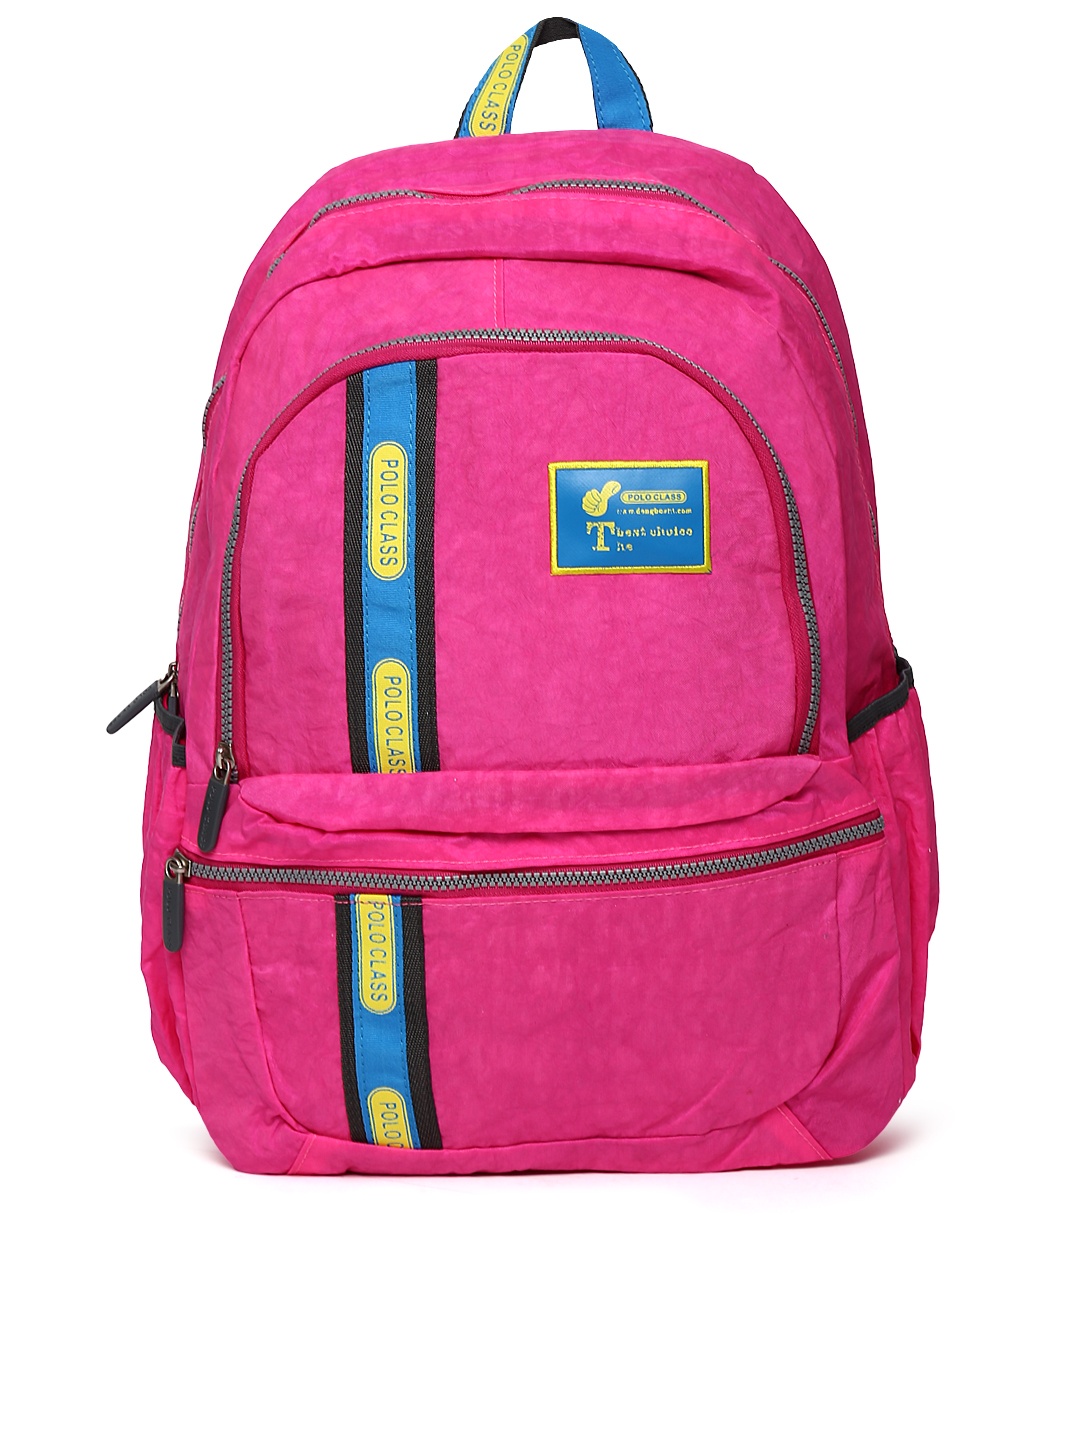 Myntra Polo Class Women Pink Backpack 429704 | Buy Myntra Polo Class Backpacks at best price 